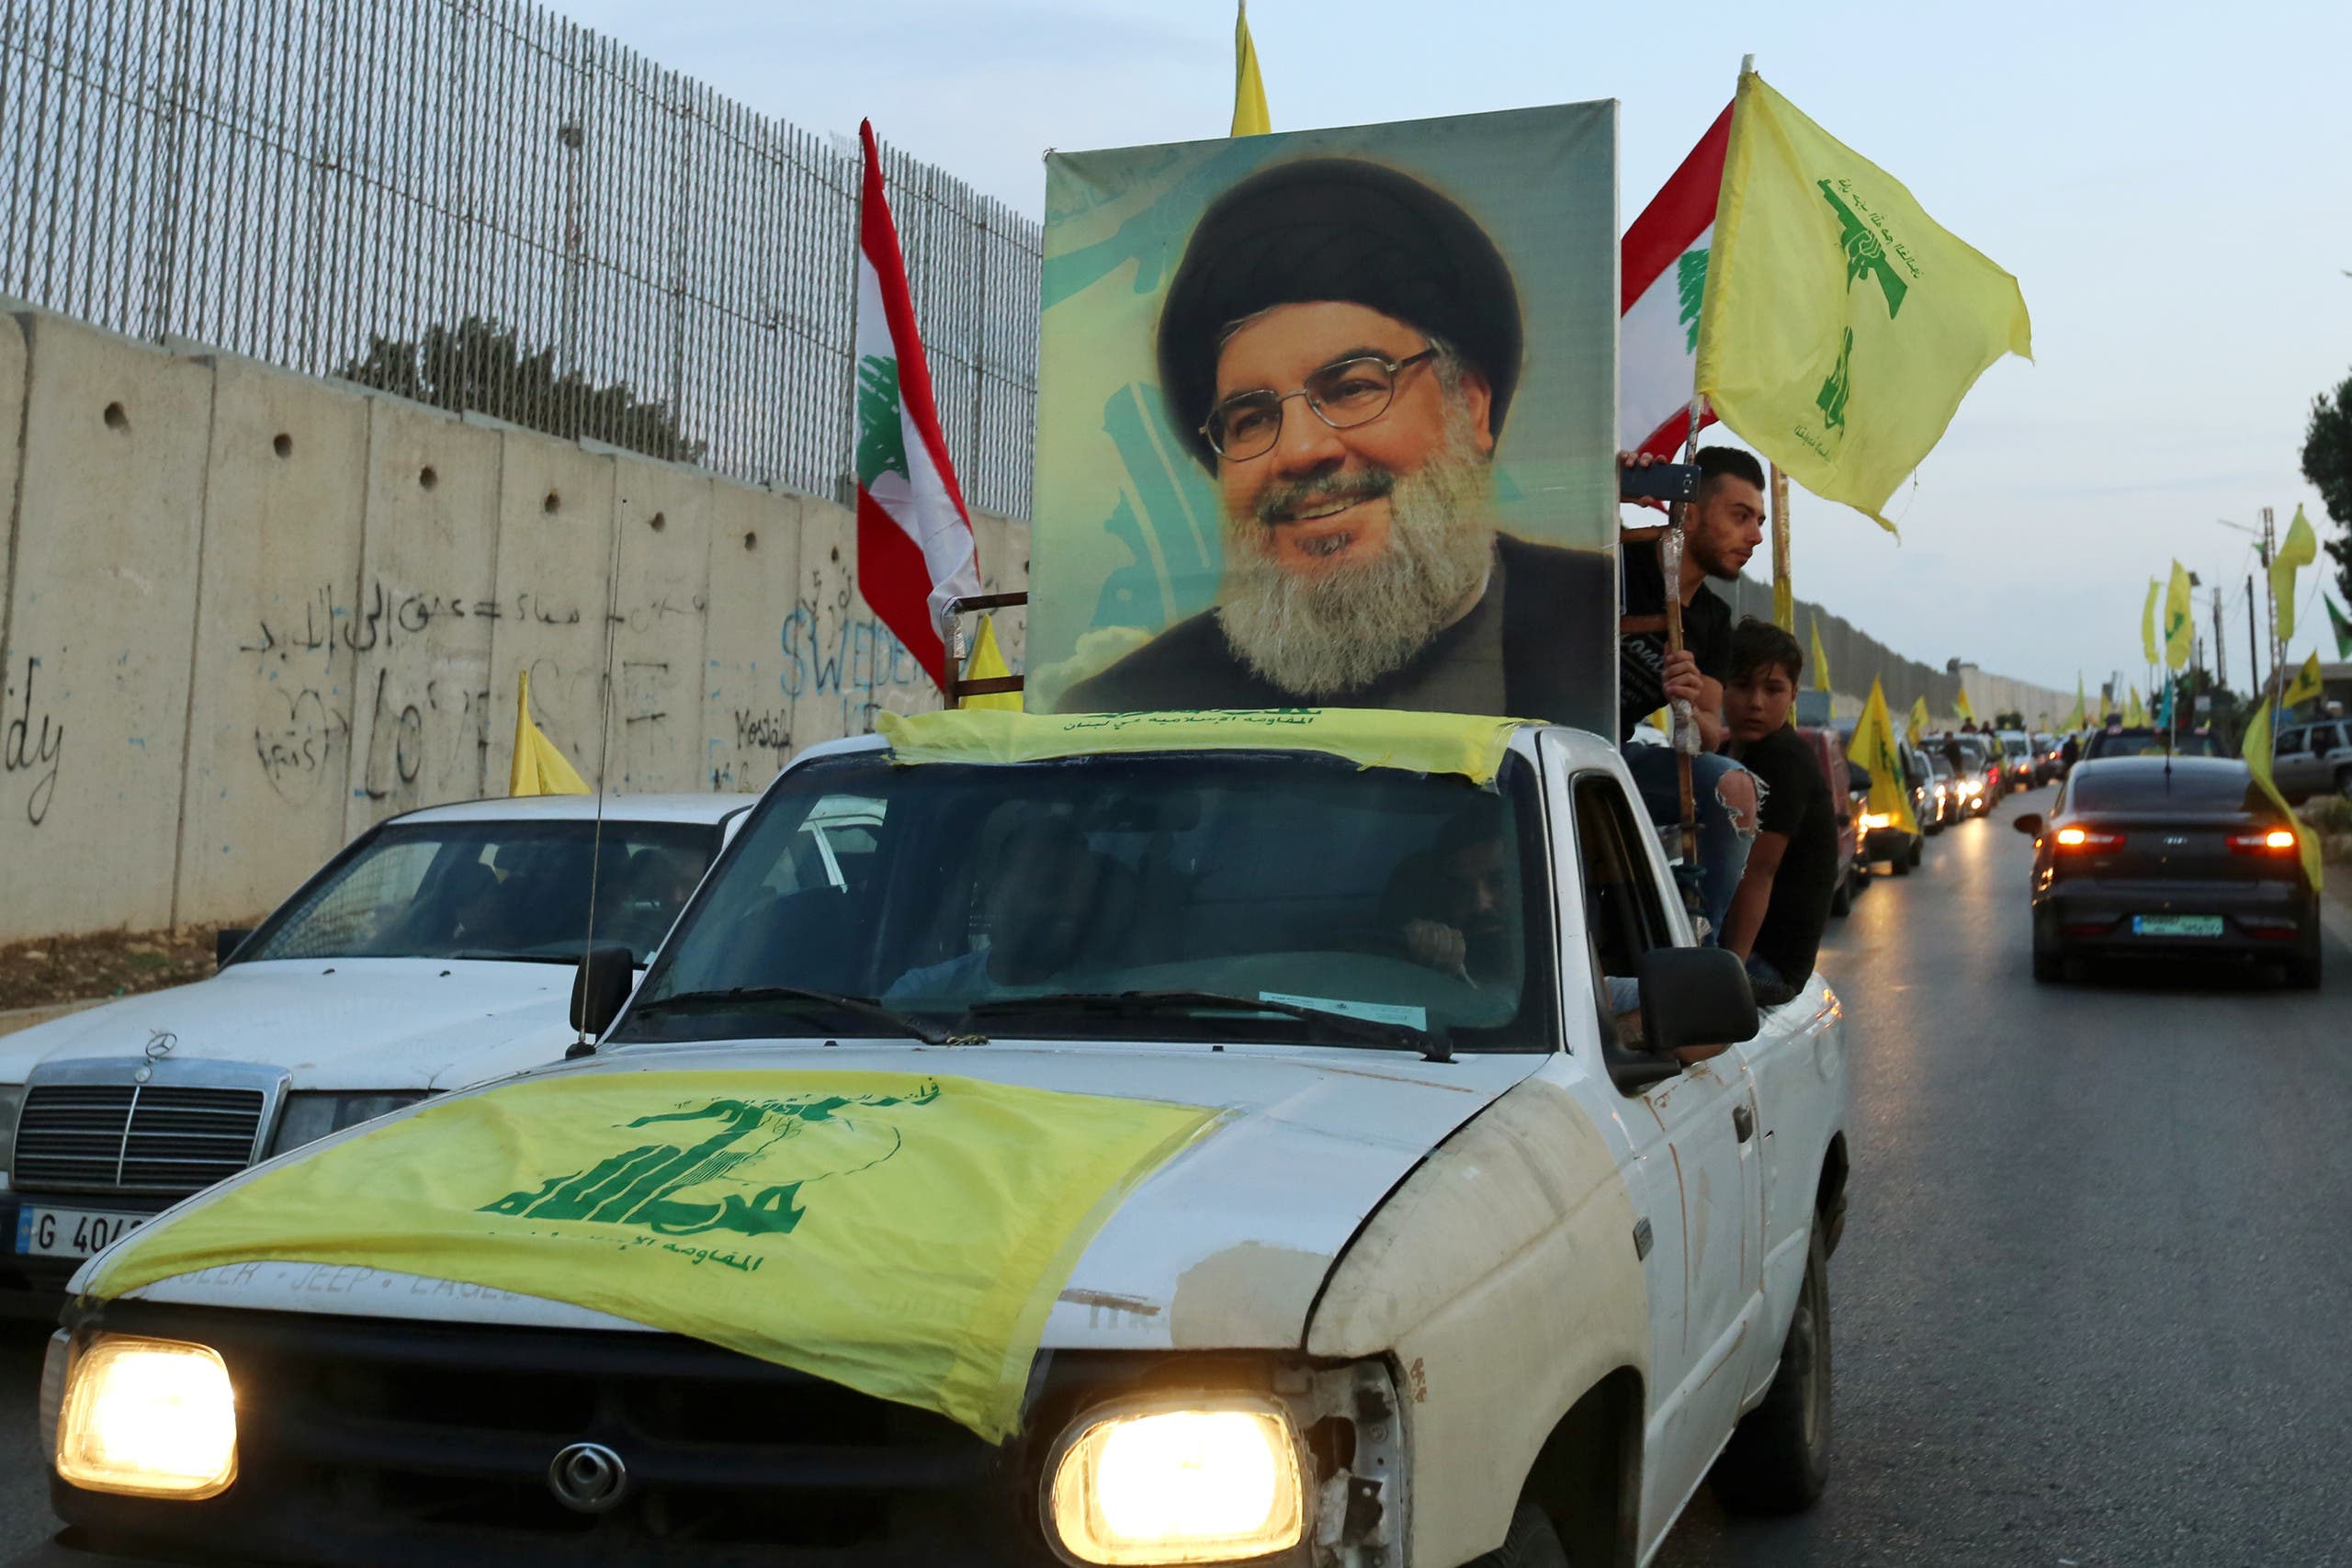 Supporters of Lebanon's Hezbollah leader Hassan Nasrallah ride in a vehicle decorated with Hezbollah and Lebanese flags and a picture of him, as part of a convoy in Lebanon. (Reuters)